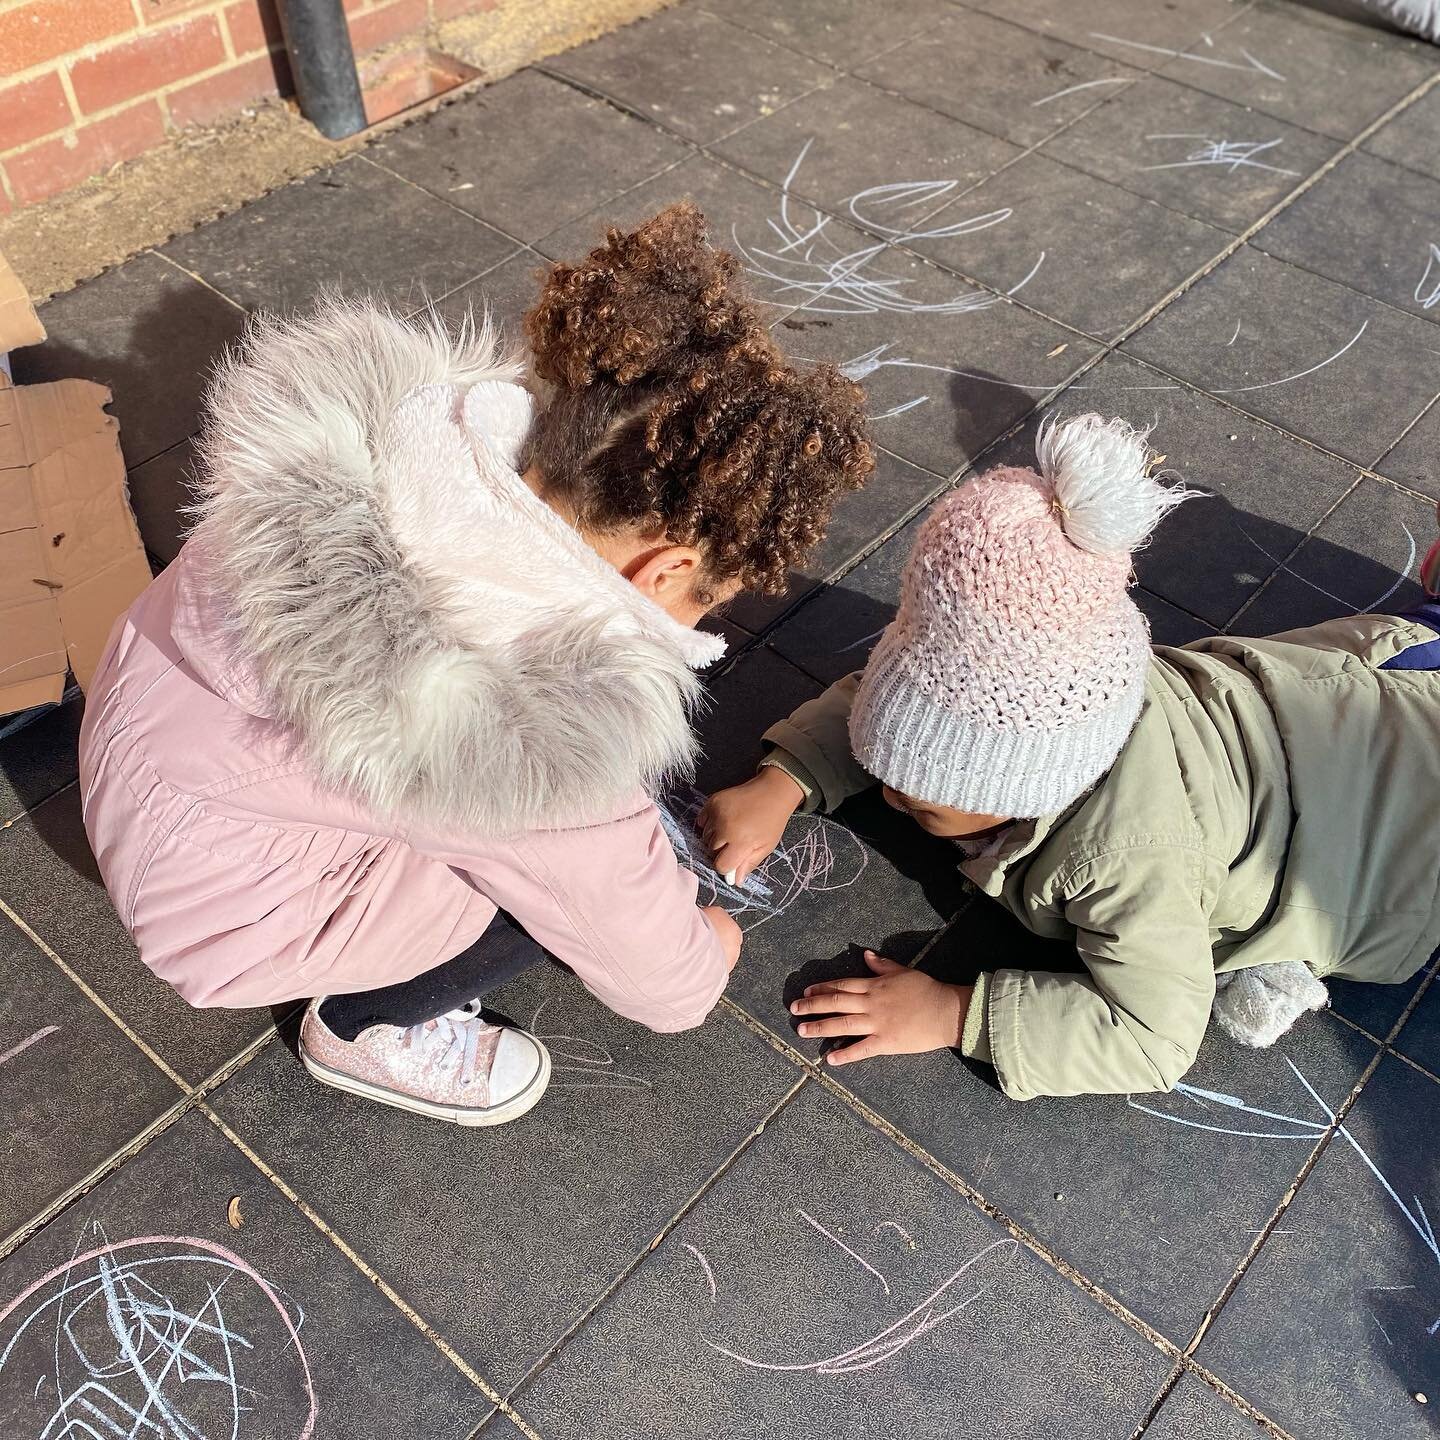 Spring has sprung and these leapfrogs are busy practising their writing skills outside in the garden! ☀️ 

#leapfrogdaynursery #babyroom #softplay #nursery #croydon #daycare #preschool #babies #toddlers #croydonmums #workingmums #earlyyears #eastcroy